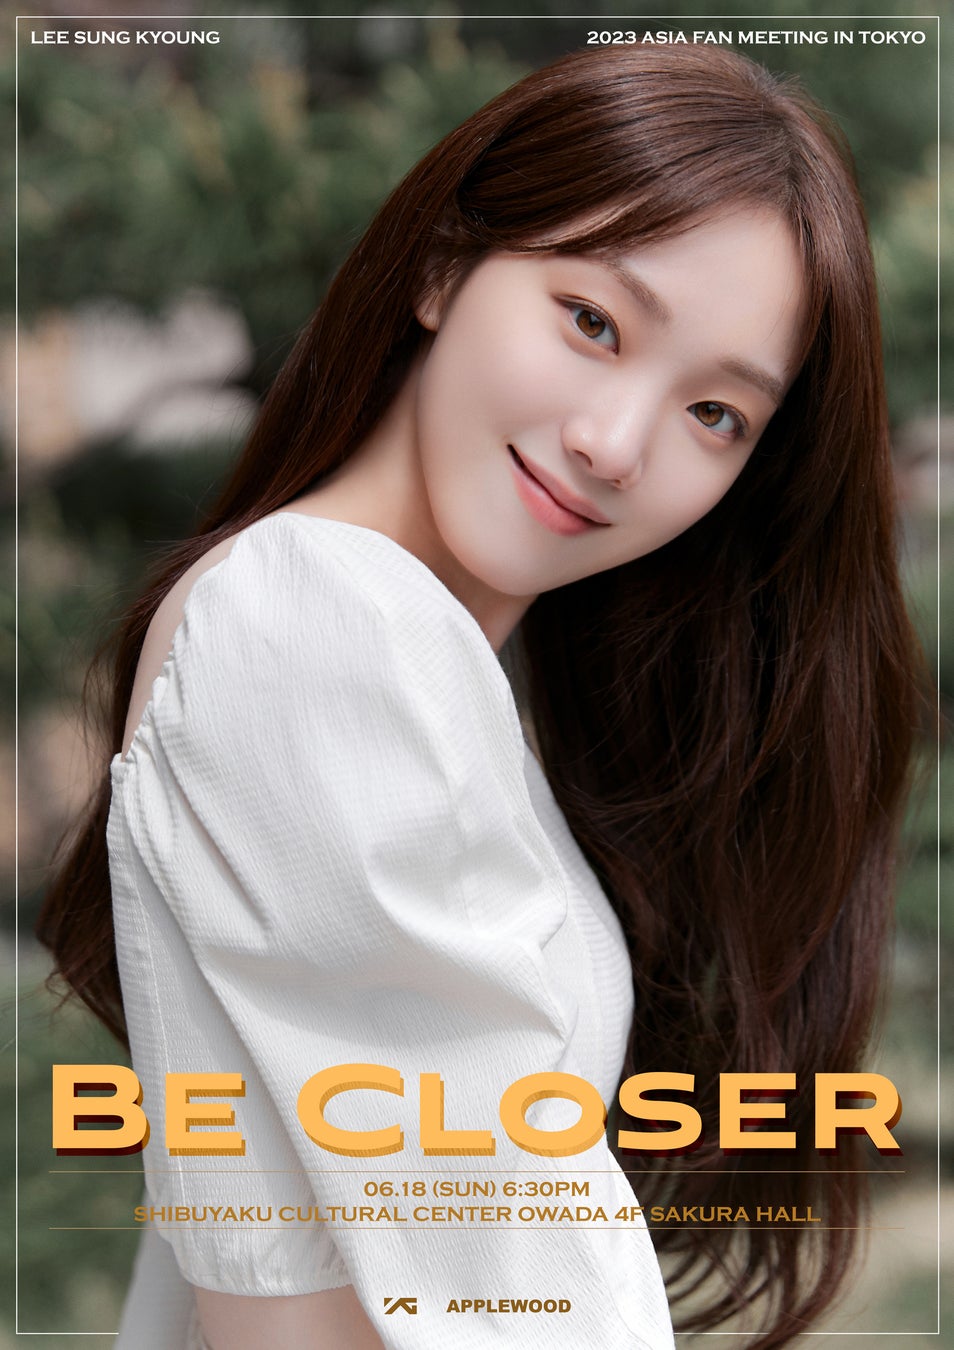 2023 LEE SUNG KYOUNG ASIA FAN MEETING [BE CLOSER] in TOKYO 開催決定！のサブ画像1